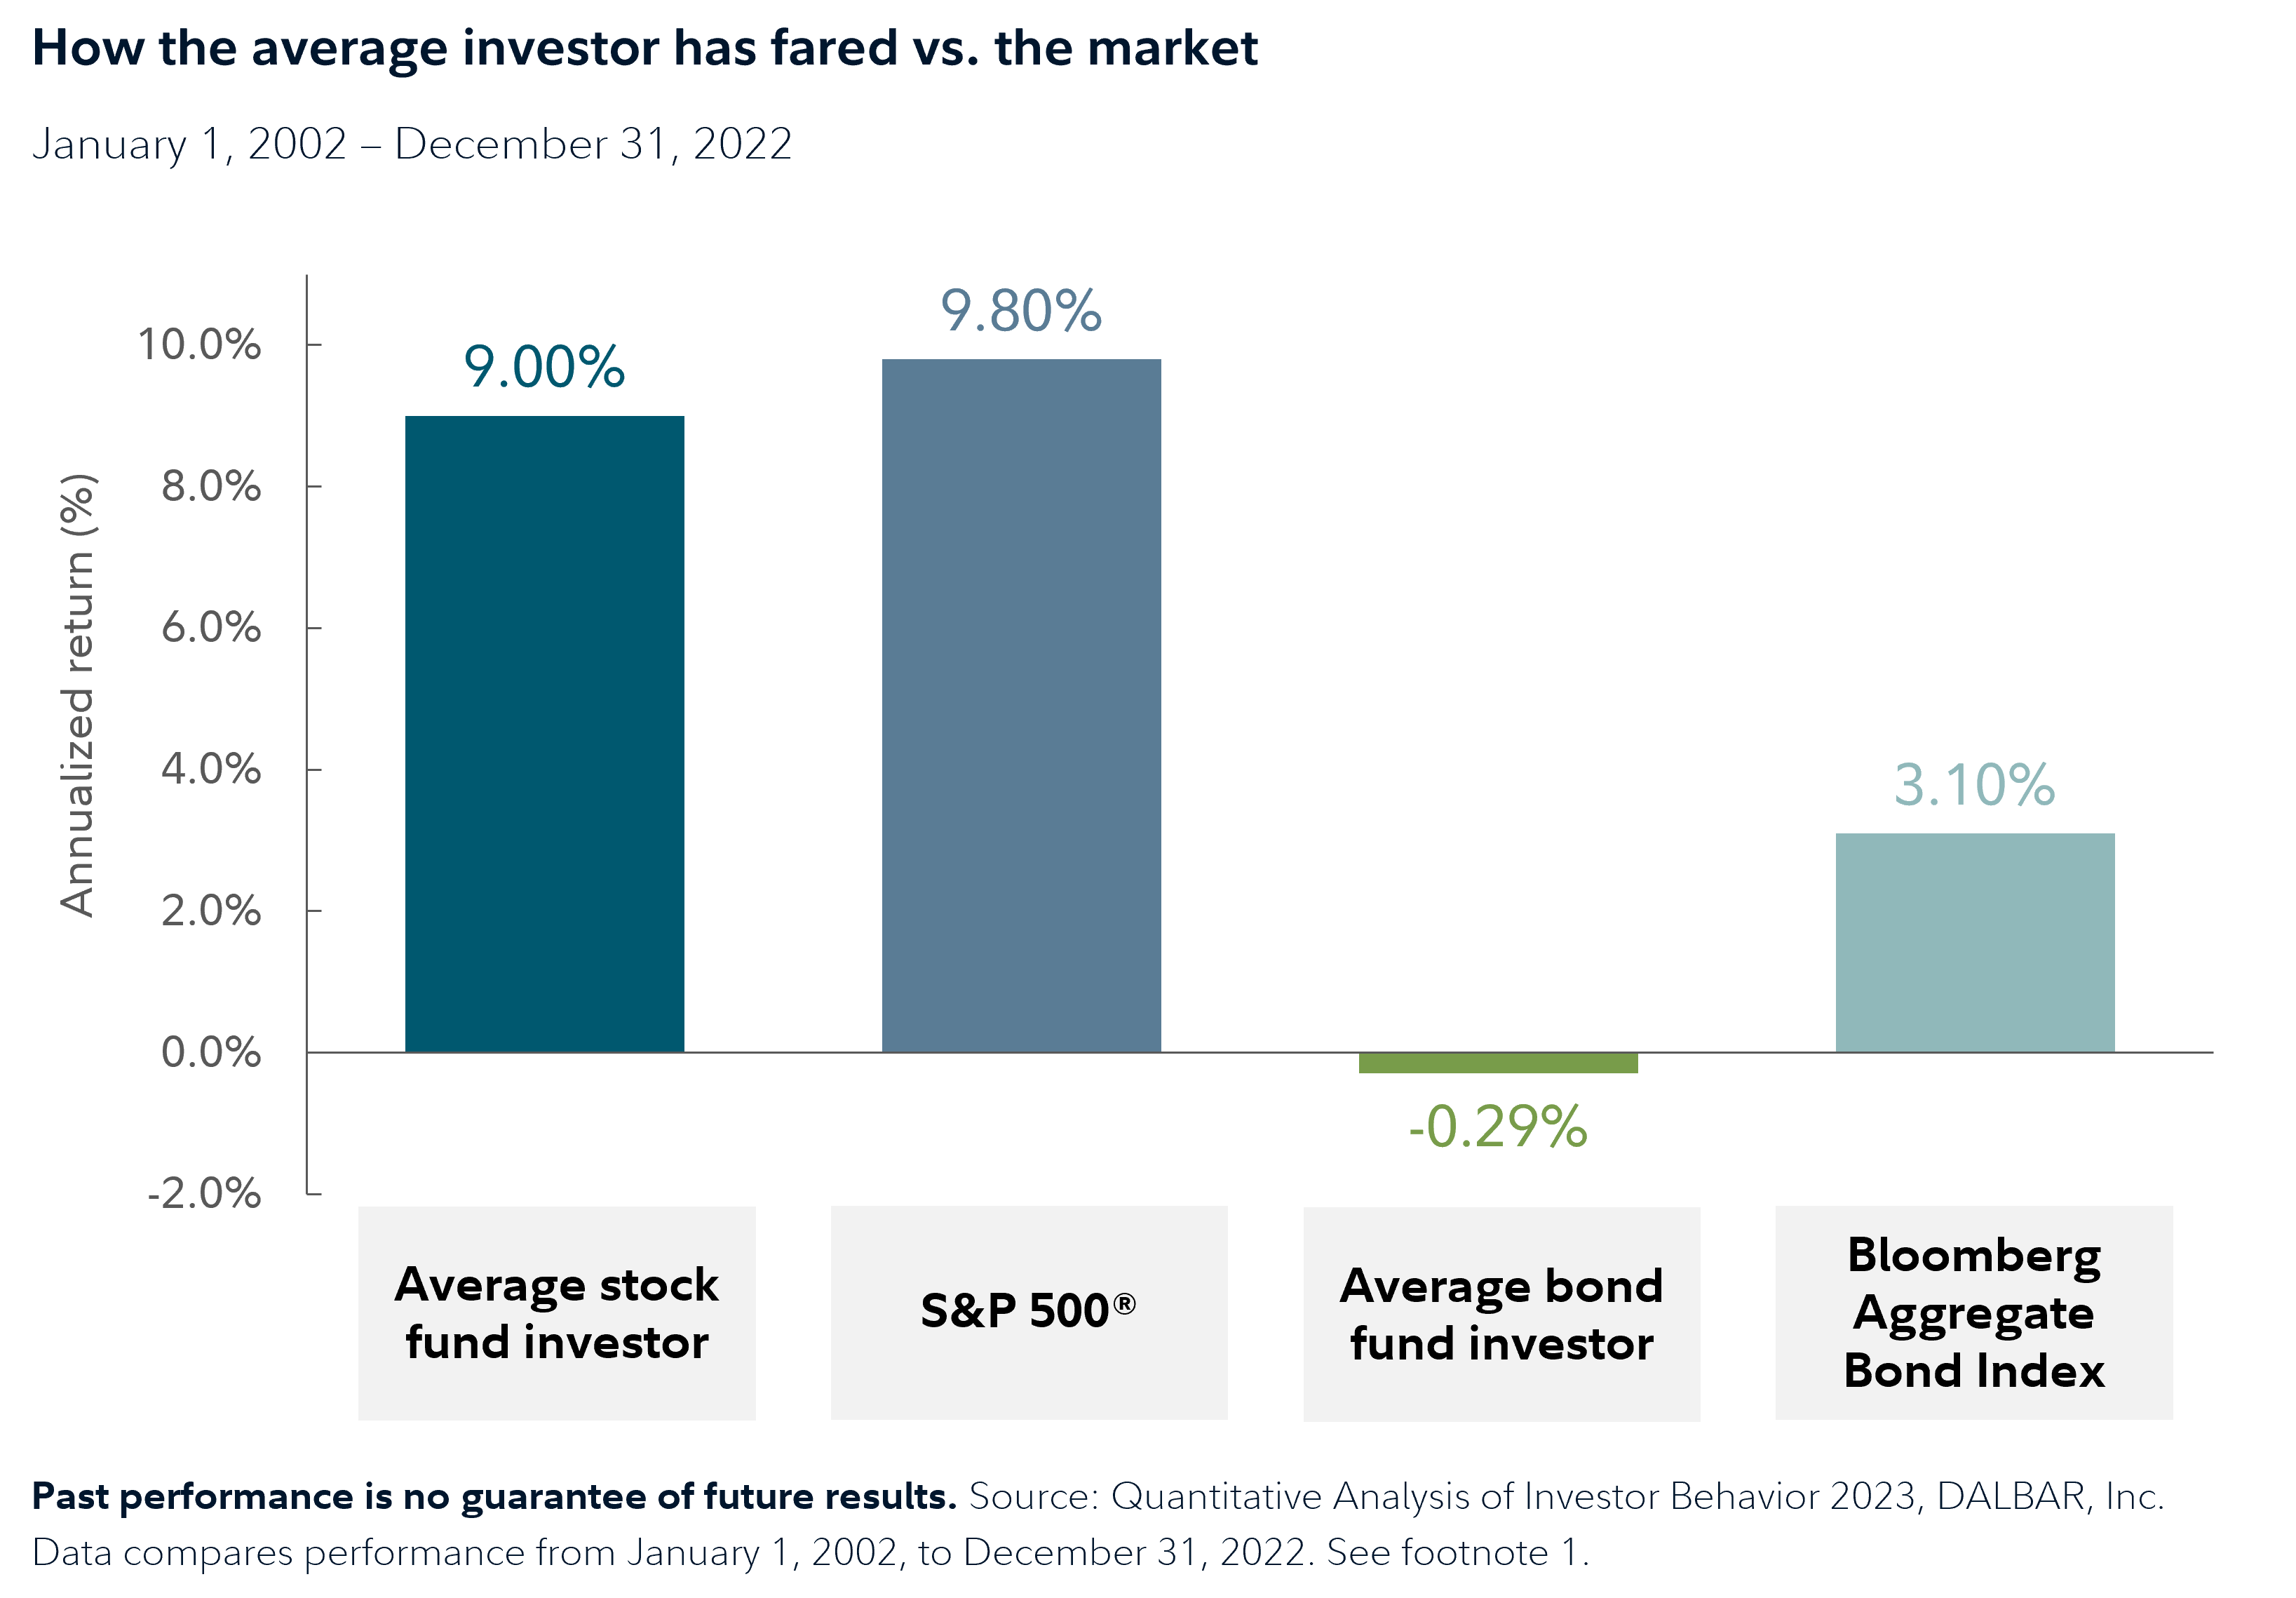 Bar graph shows how average investors' returns have compared to market indexes over time. It compares average annual returns for the average stock fund investor, the S&P 500 Index, the average bond fund investor, and the Bloomberg Aggregate Bond Index. Between January 1, 2002, and December 31, 2022, the average stock fund investor has seen returns of 9.00%, the S&P 500 Index has returned 9.80%, the average bond fund investor has seen returns of -0.29%, and the Bloomberg Aggregate Bond Index has returned 3.10%. Source: Quantitative Analysis of Investor Behavior 2023, DALBAR, Inc. Past performance is not a guarantee of future results. Data compares performance from January 1, 2002, to December 31, 2022. See footnote 1.